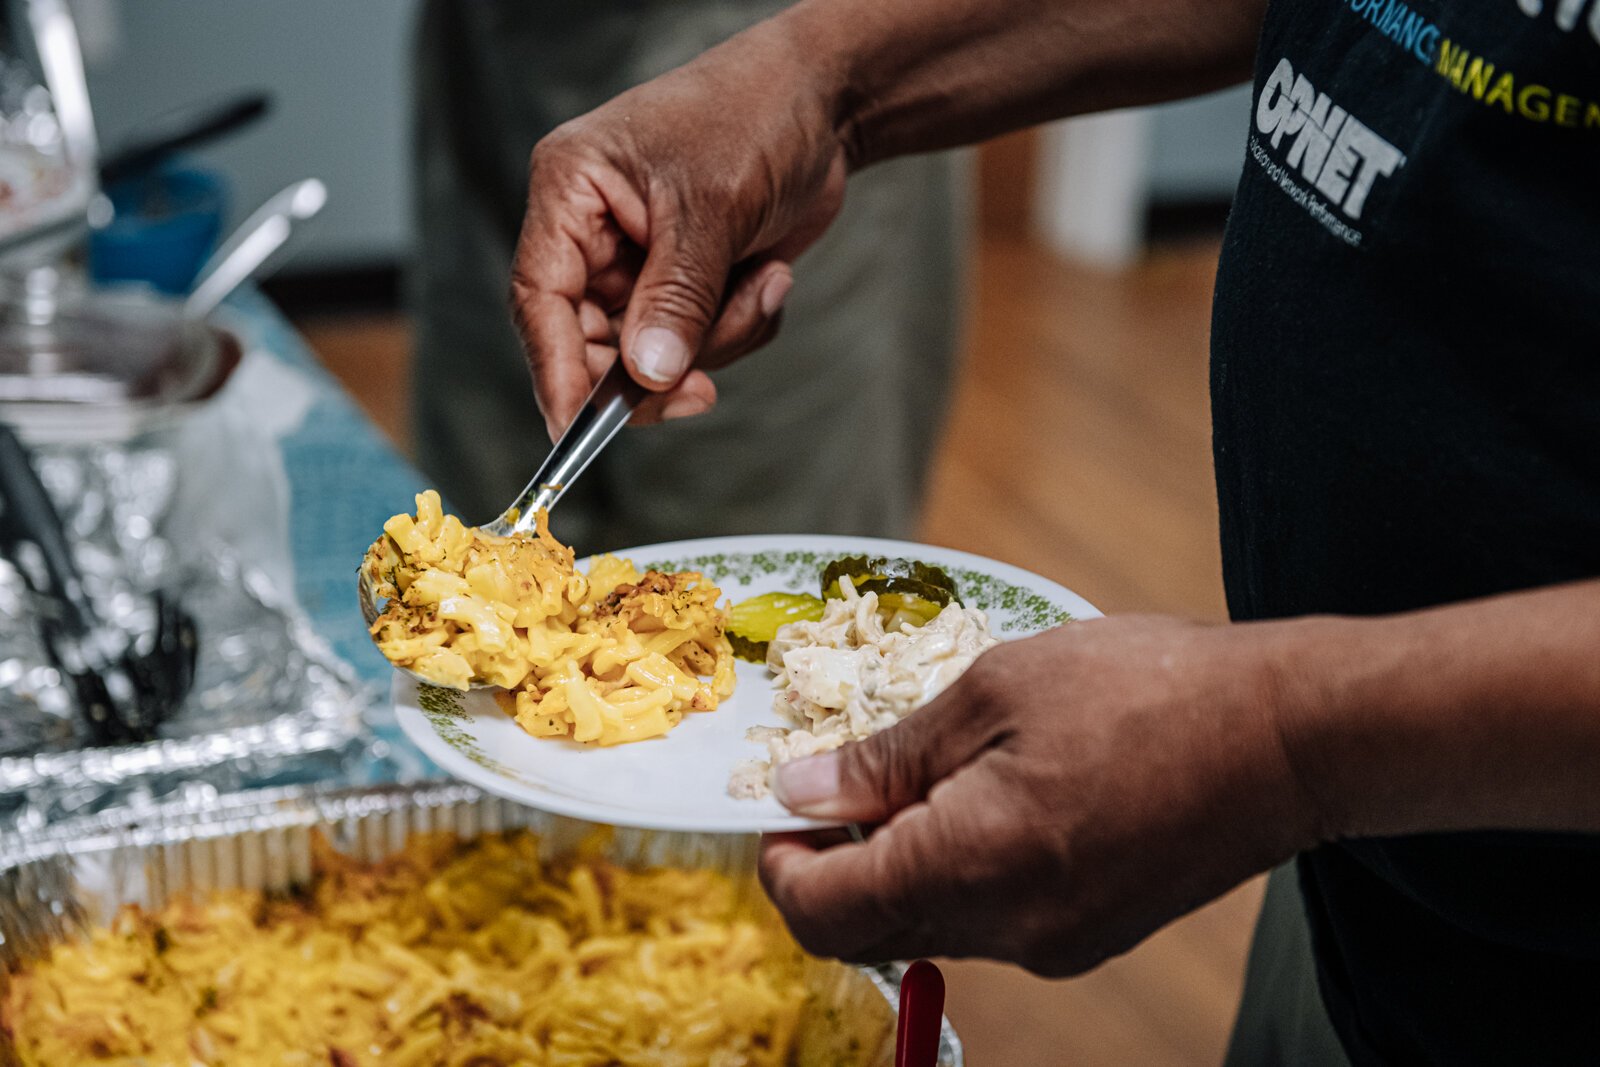 Kent Carter dips a plate during "Super Saturday" a free monthly community meal for the housing members at River's Edge. River's Edge is a  supportive housing complex on Spy Run Ave. Ext. in Fort Wayne.